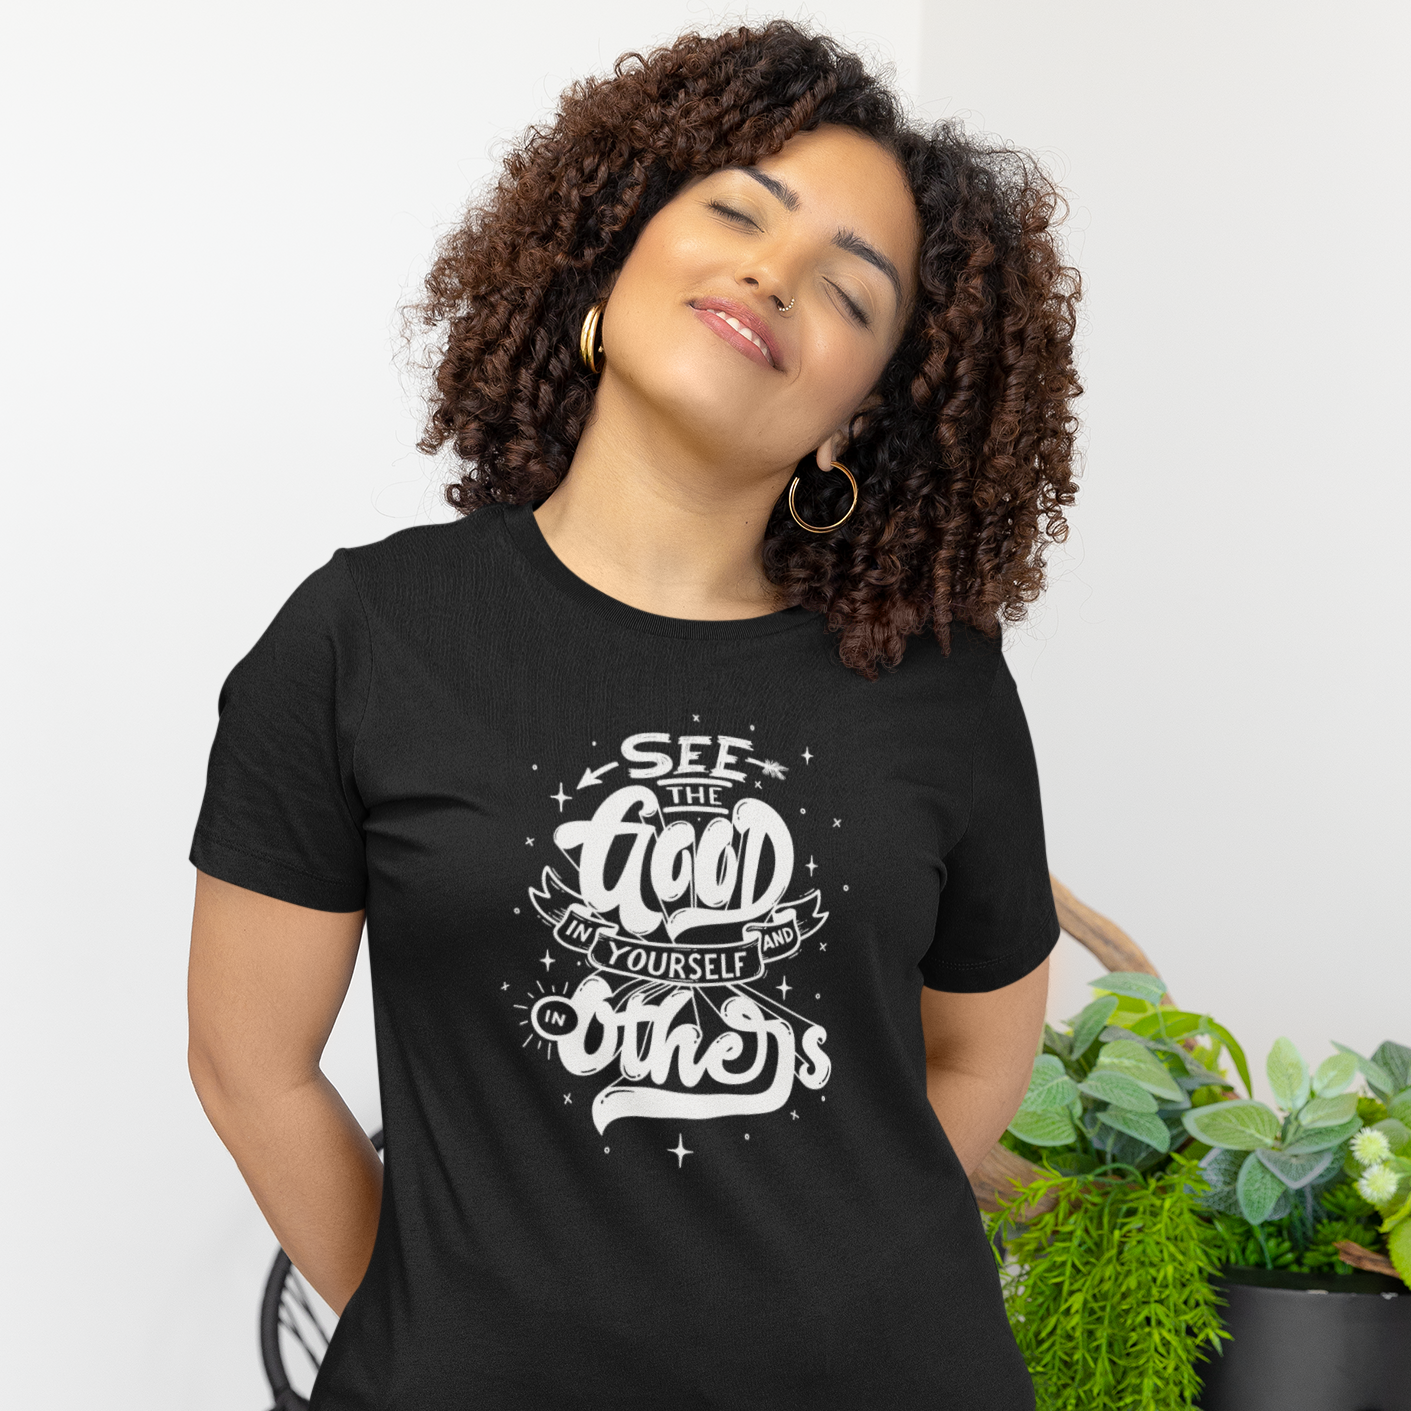 Story of Awakening Lifestyle Community Spirituality Relationships Love Light Meditation Oneness Earth Balance Healing Shop Store Charity Tree Nature Read Write T shirt Tops Tees Clothing Women Horoscope Organic Cotton See The Good In Yourself And Others Quote